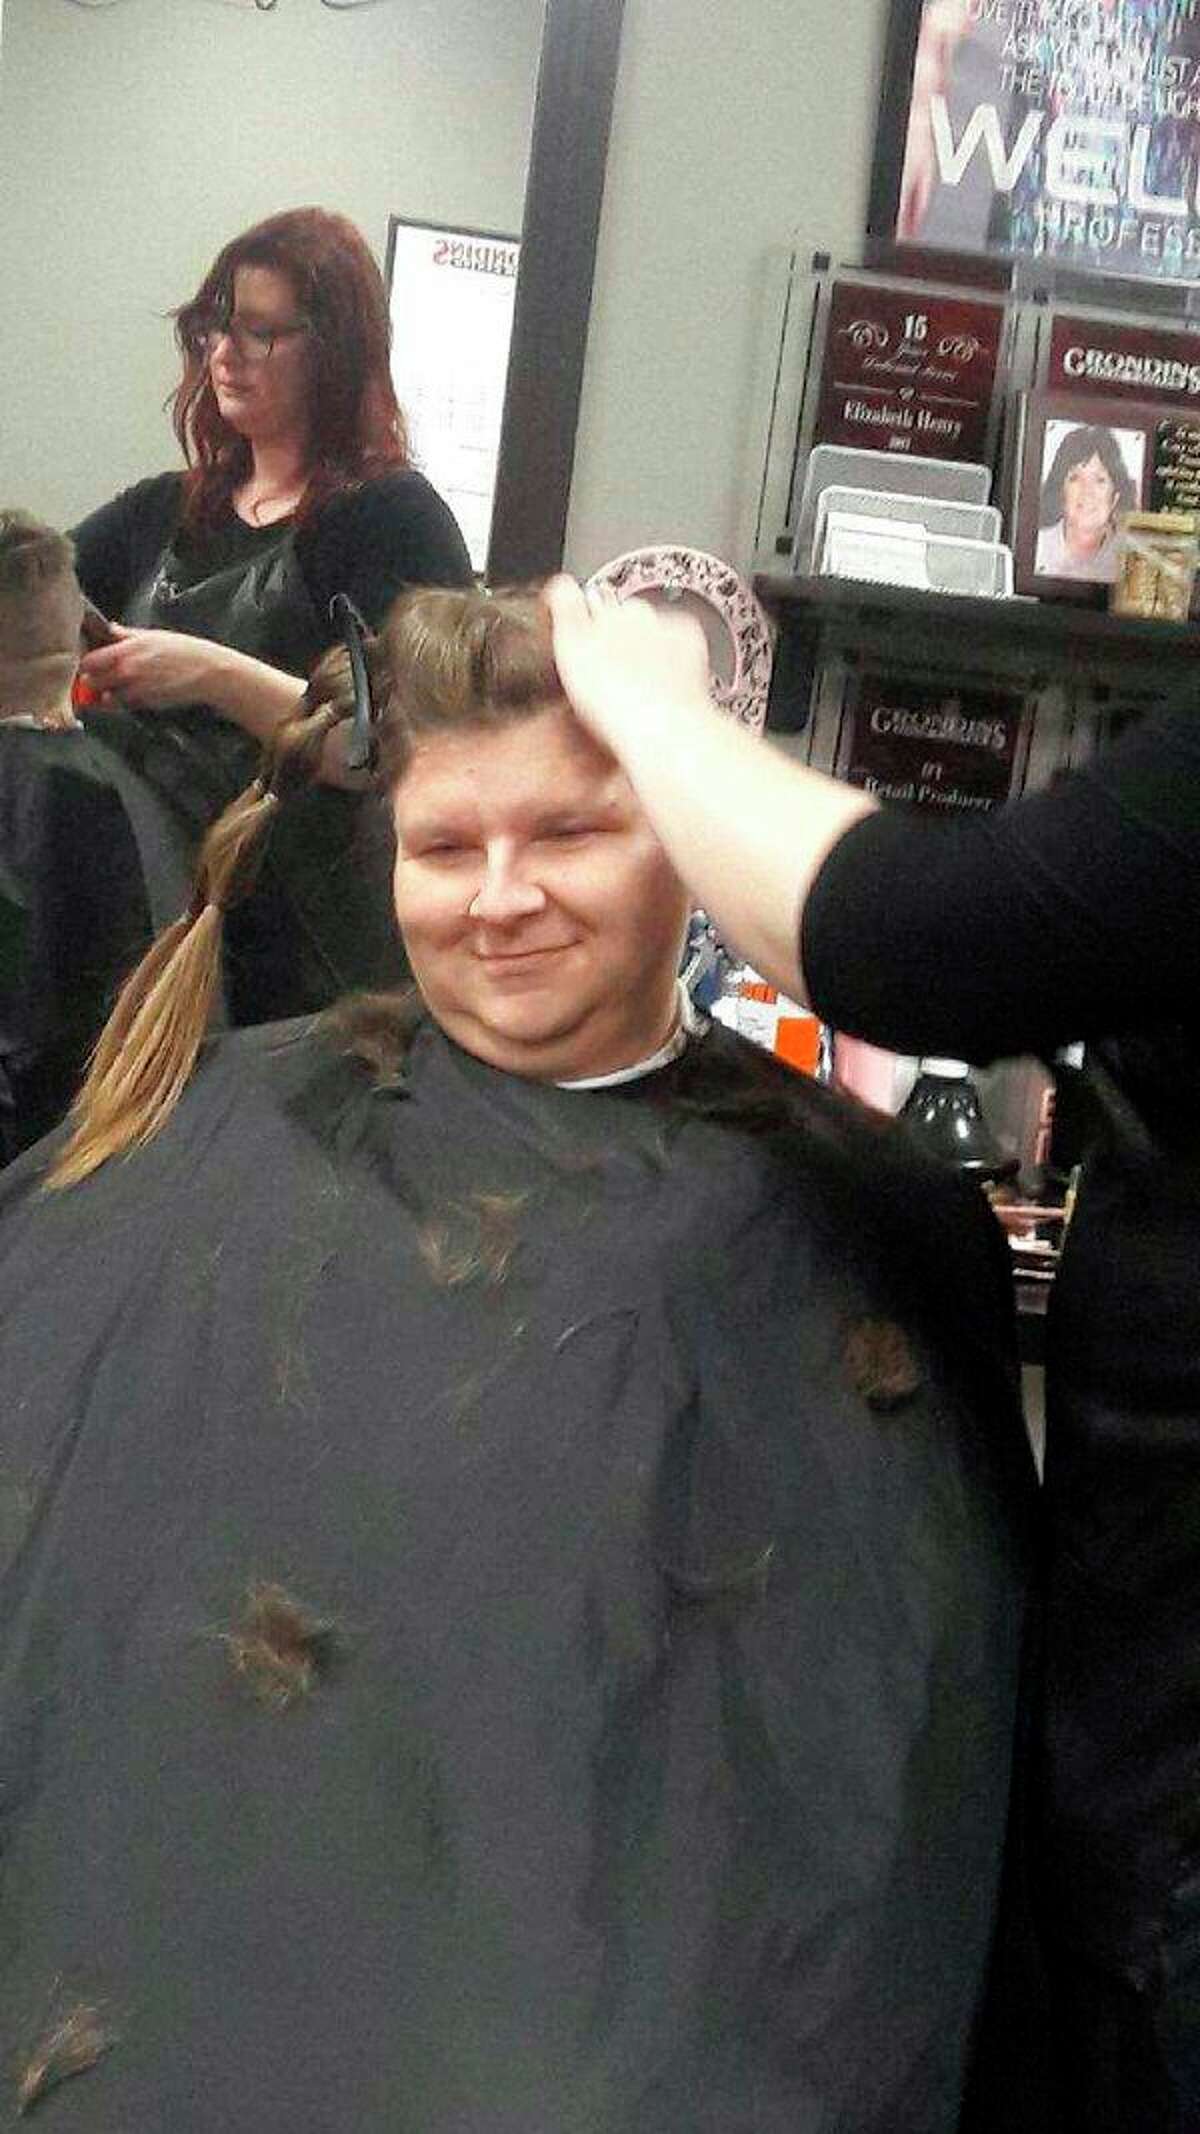 Members First Credit Union employee Melanie Duke while her head is shaved. (Photo provided)